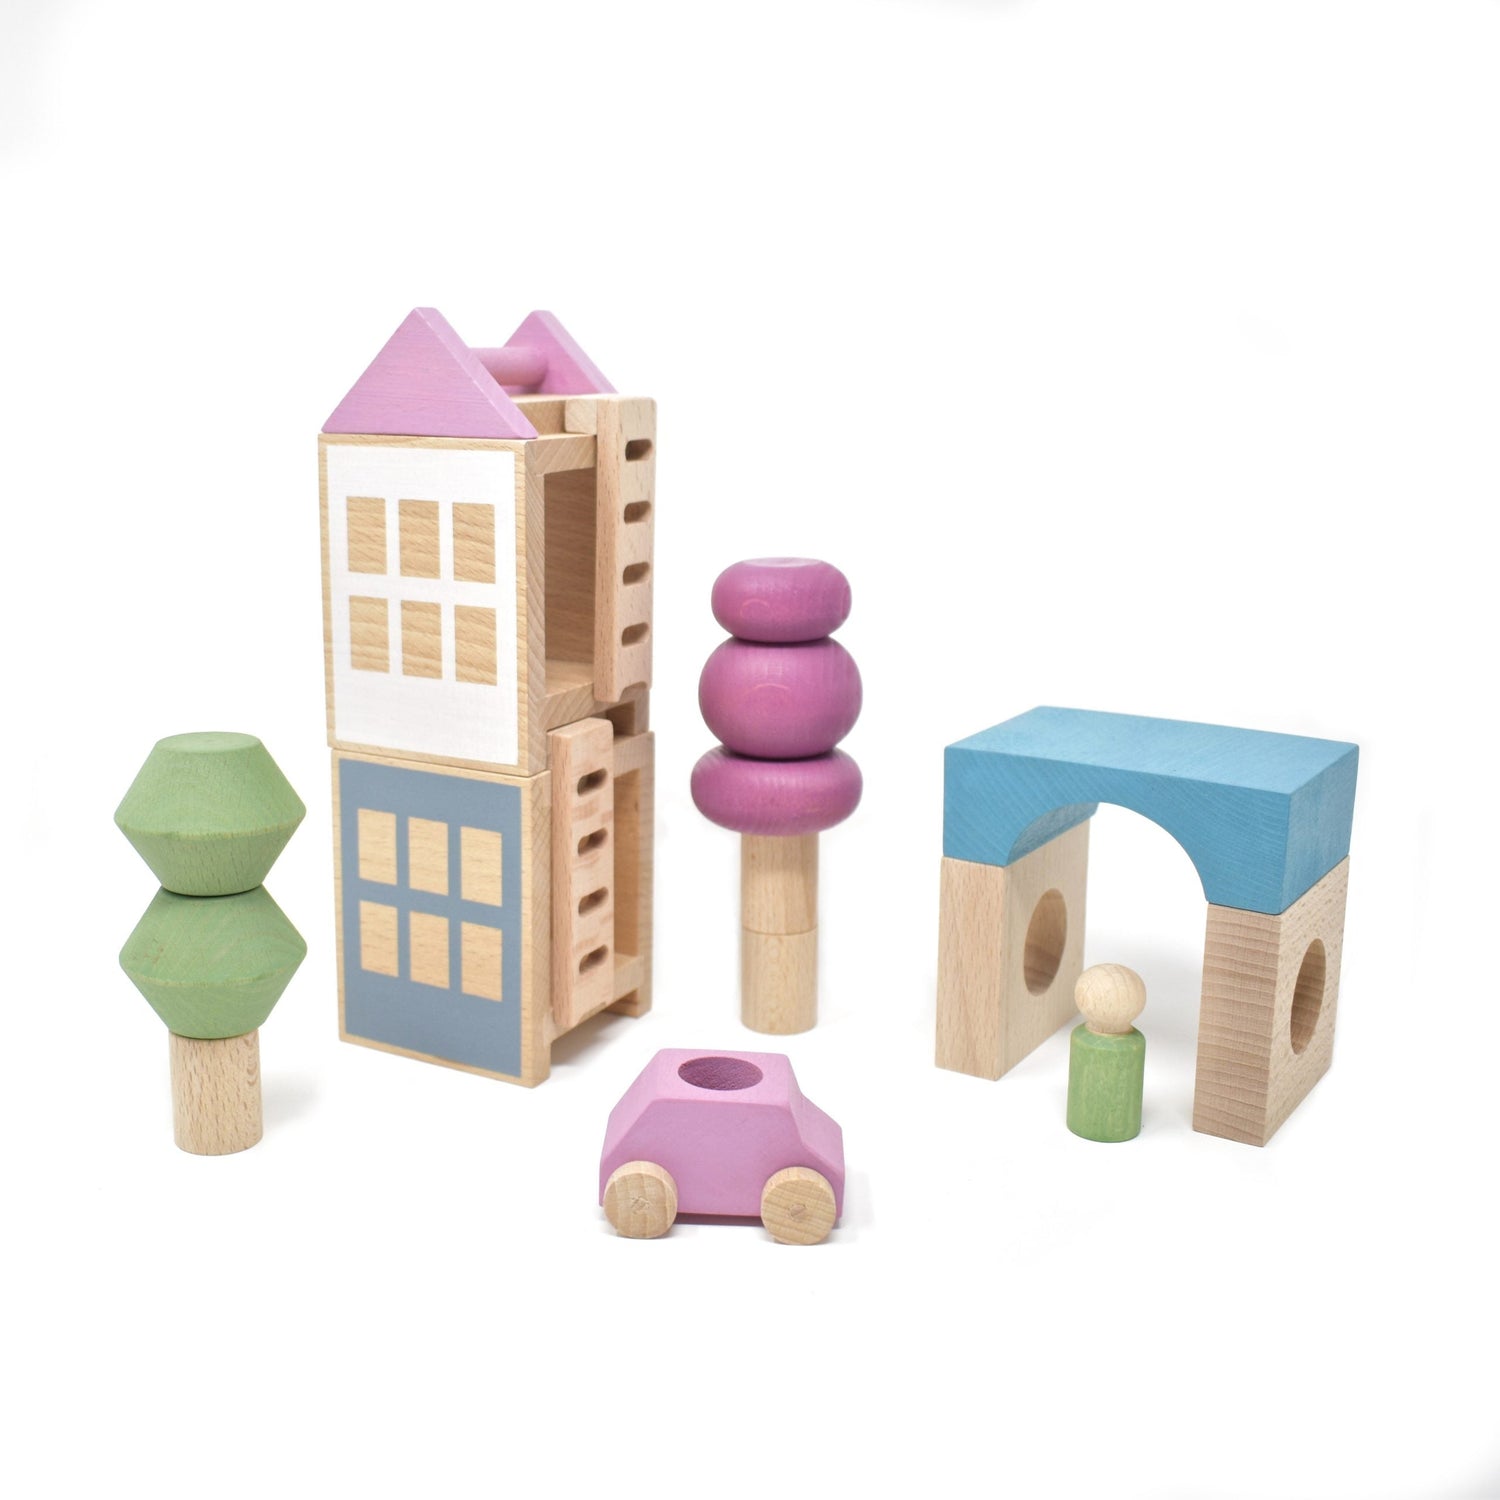 LUBULONA TOWN SPRING CITY MINI by LUBULONA - The Playful Collective